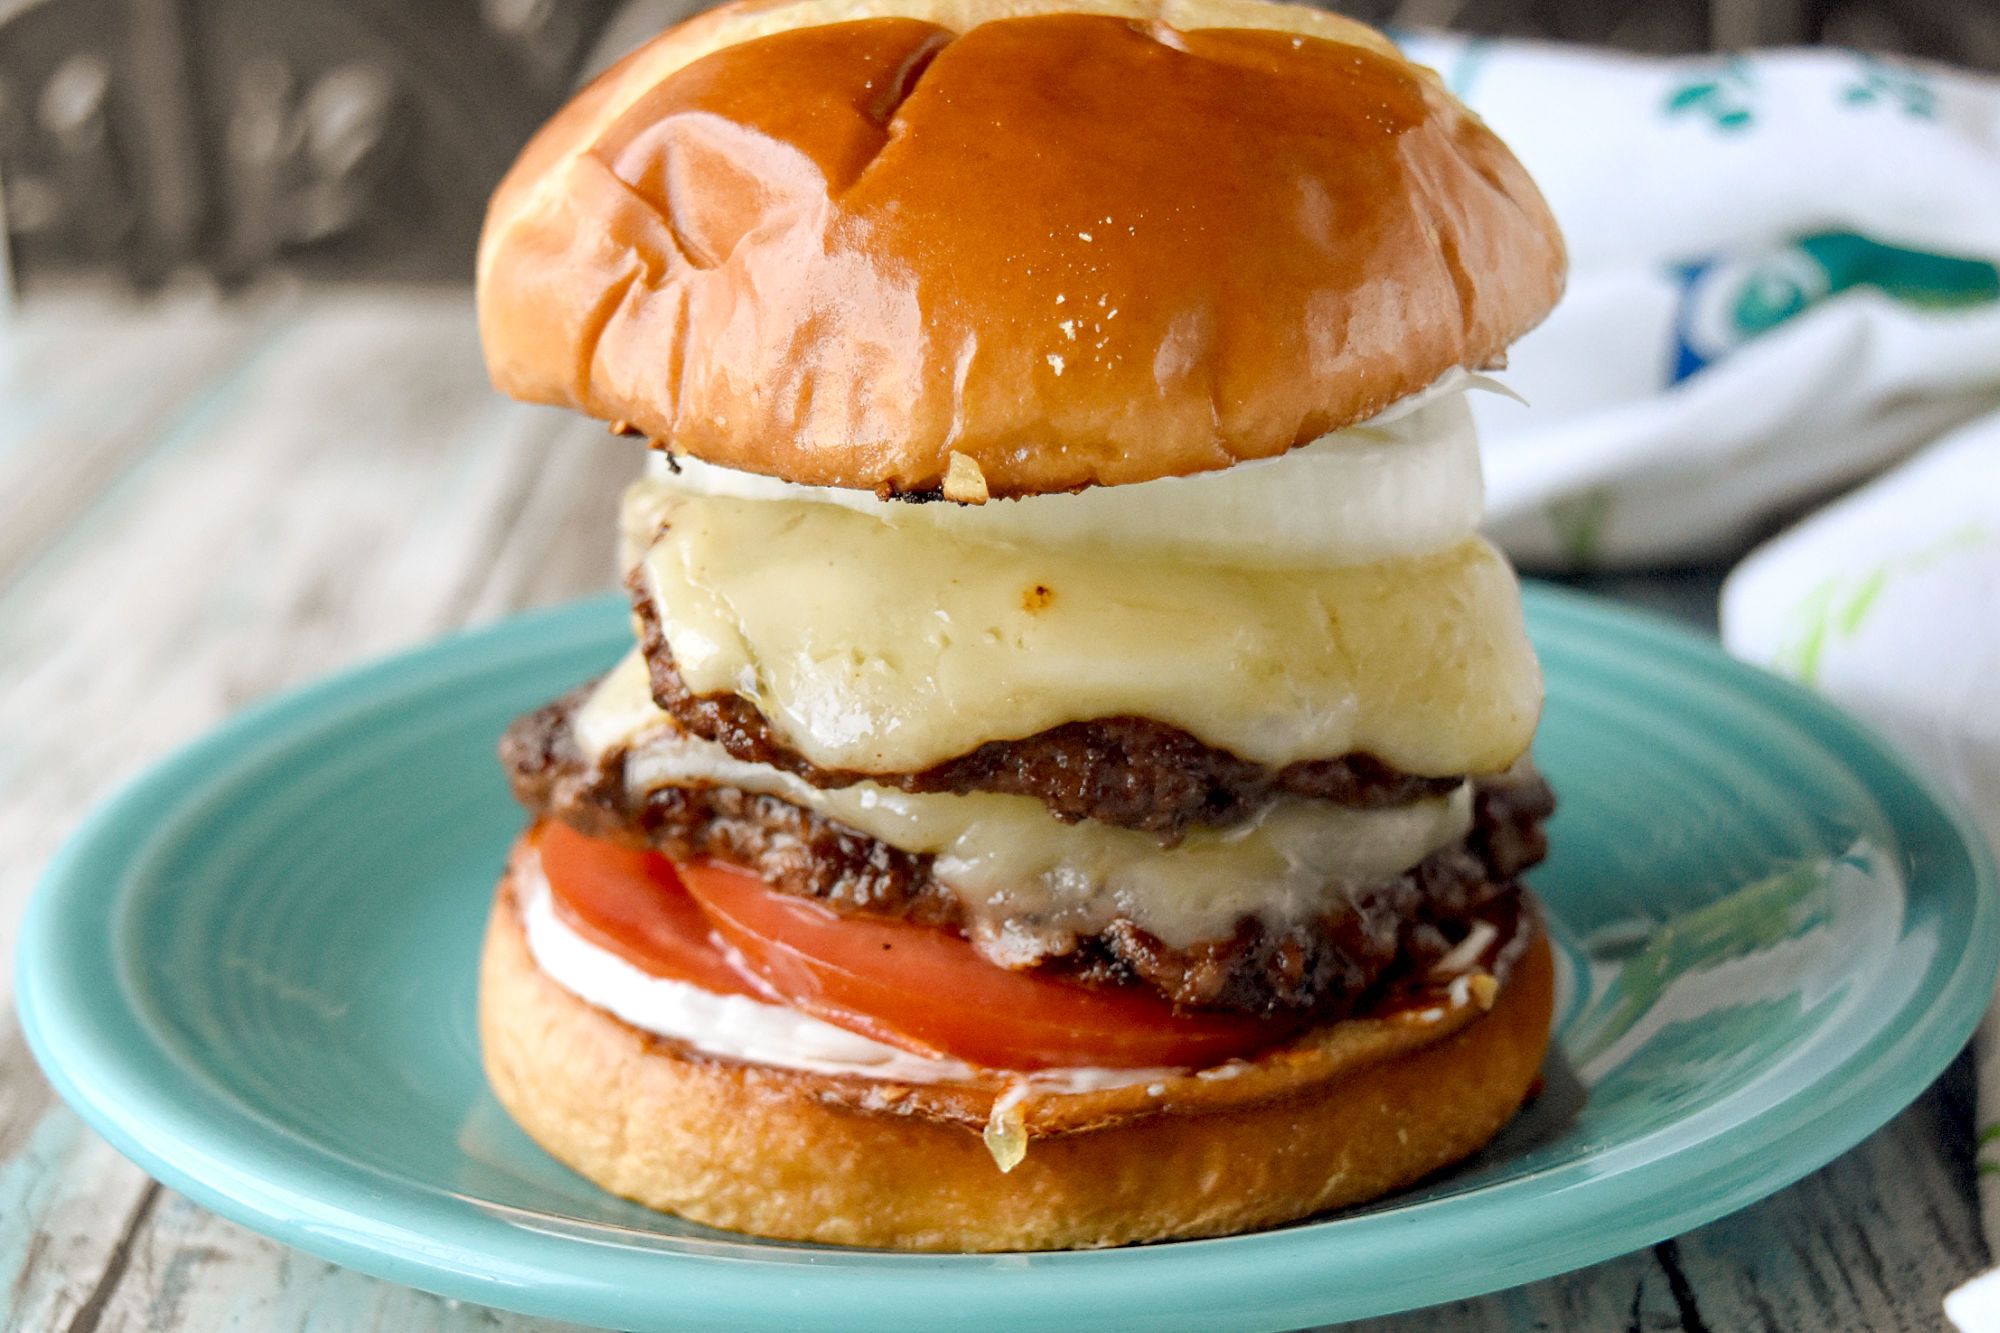 Cheddar cheese. #OurFamilyTable #BurgerMonth